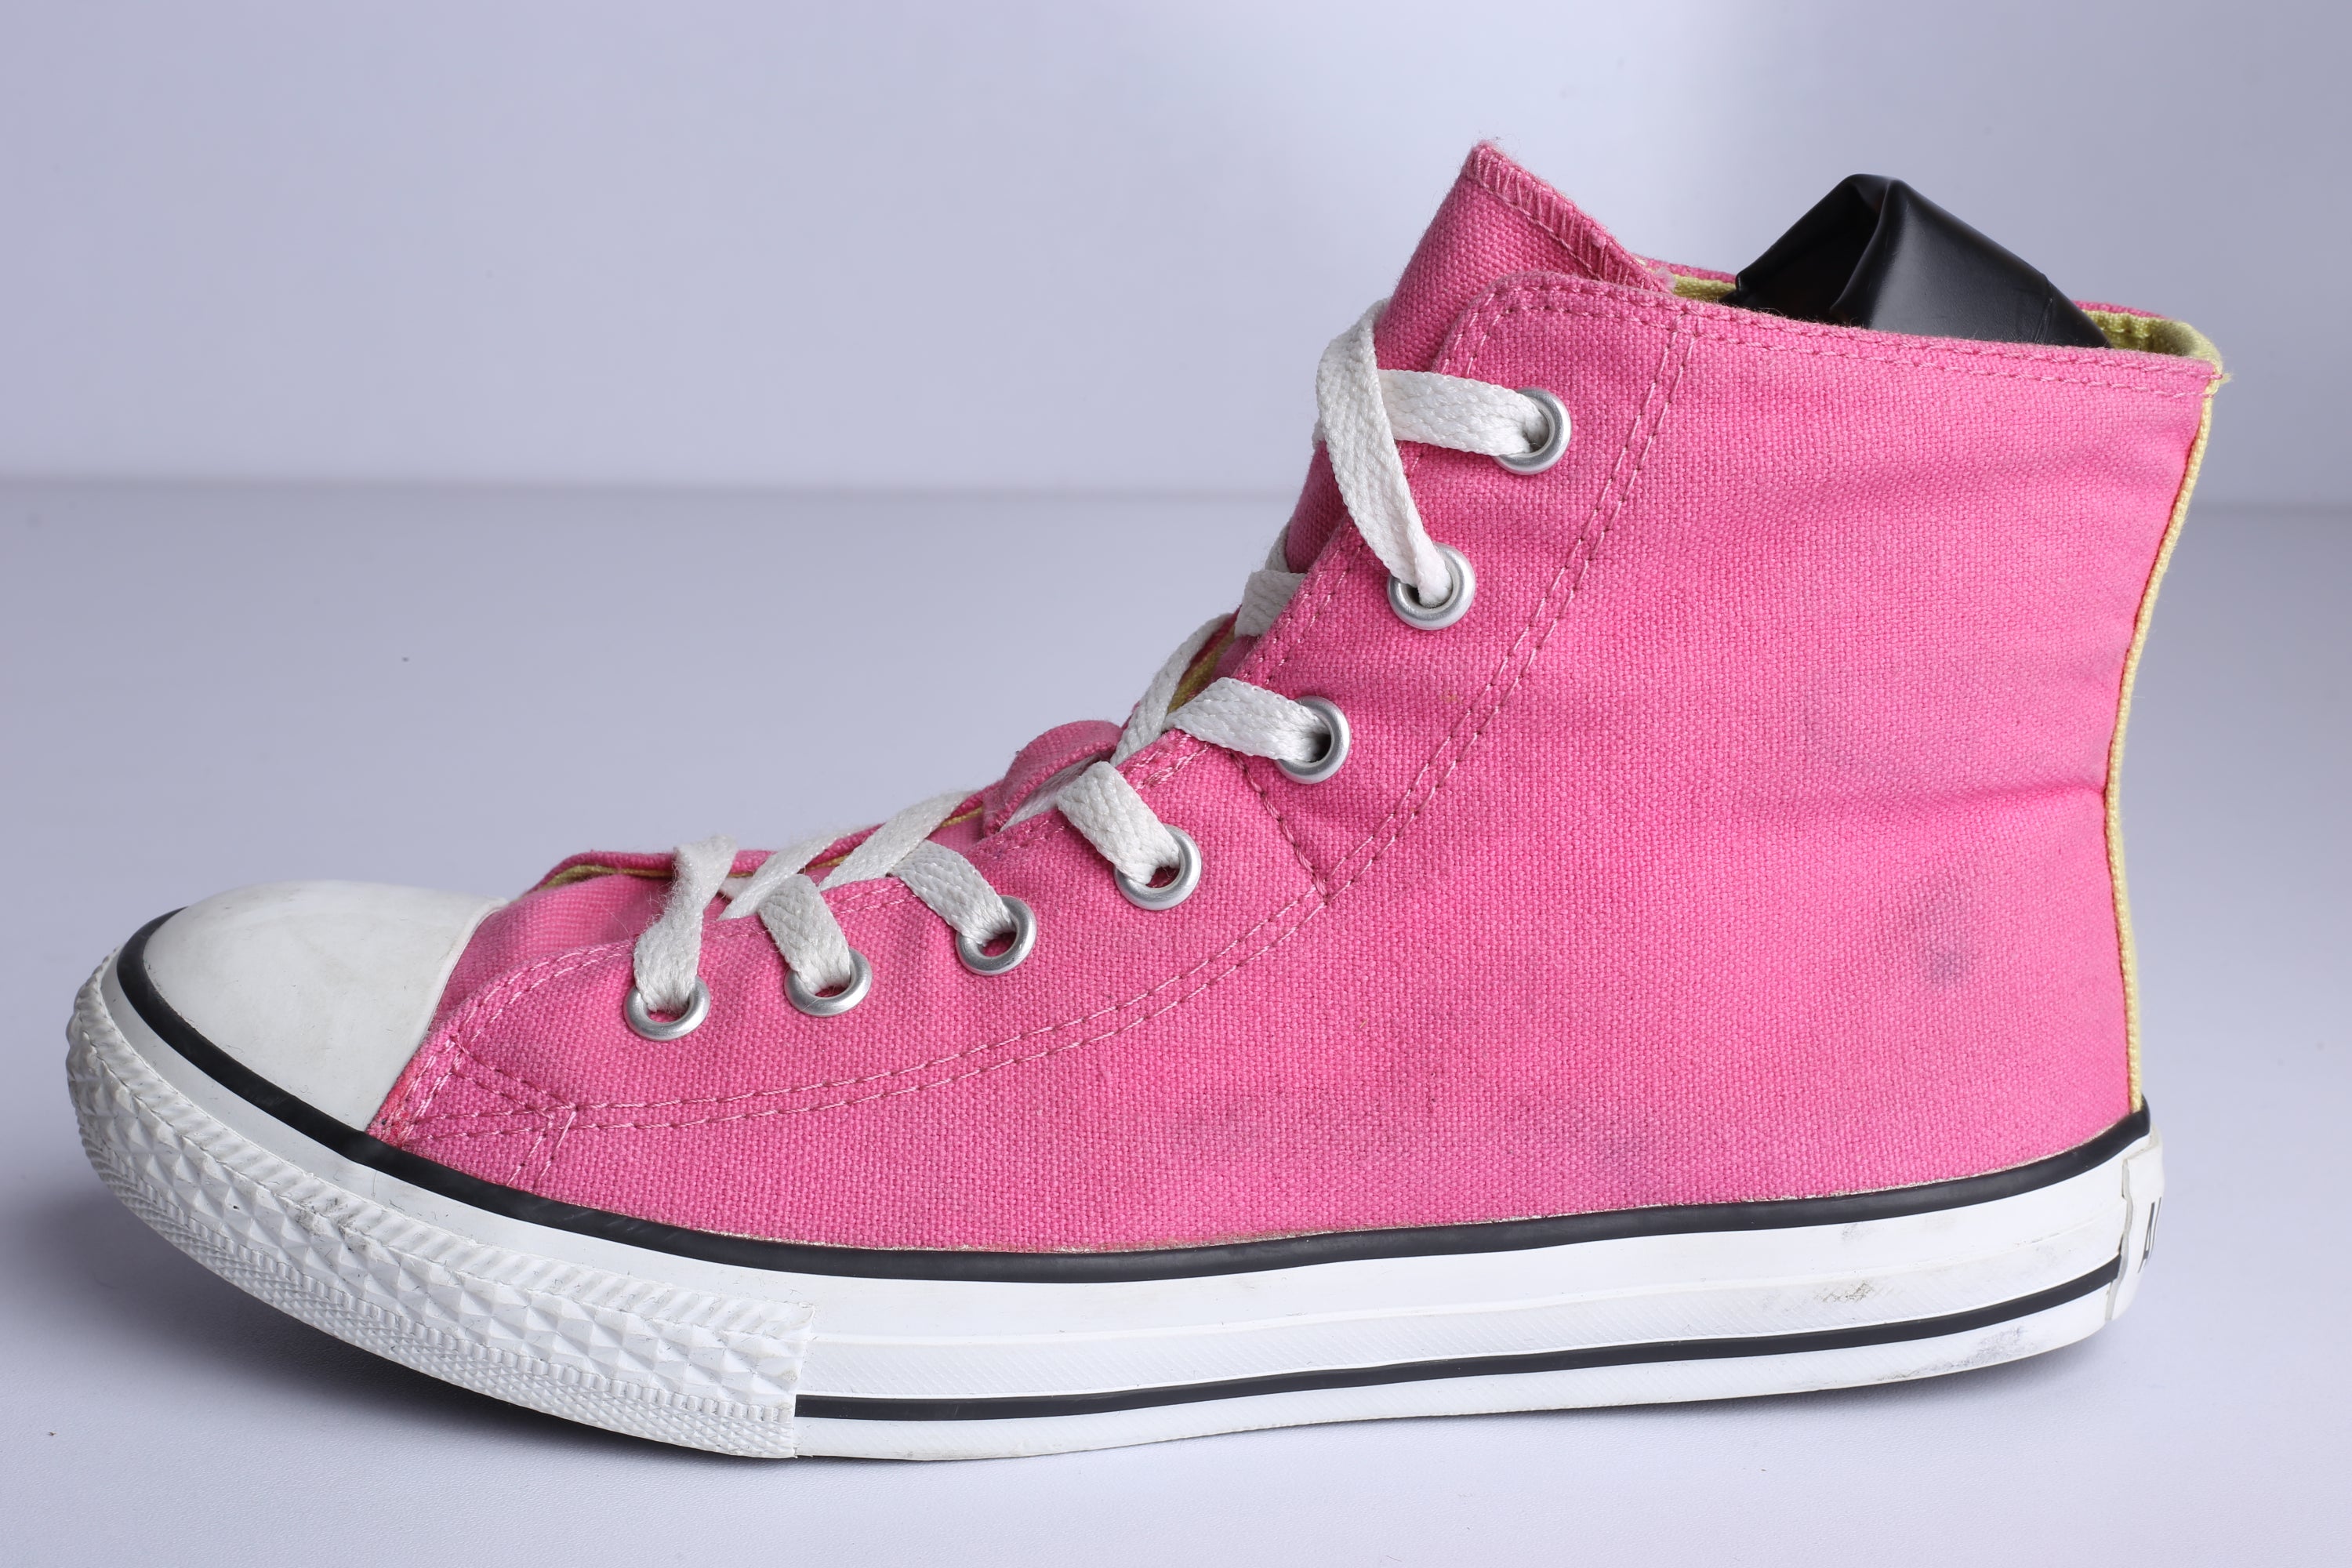 Chuck Taylor All Star High Pink  Sneaker - (Condition Good)